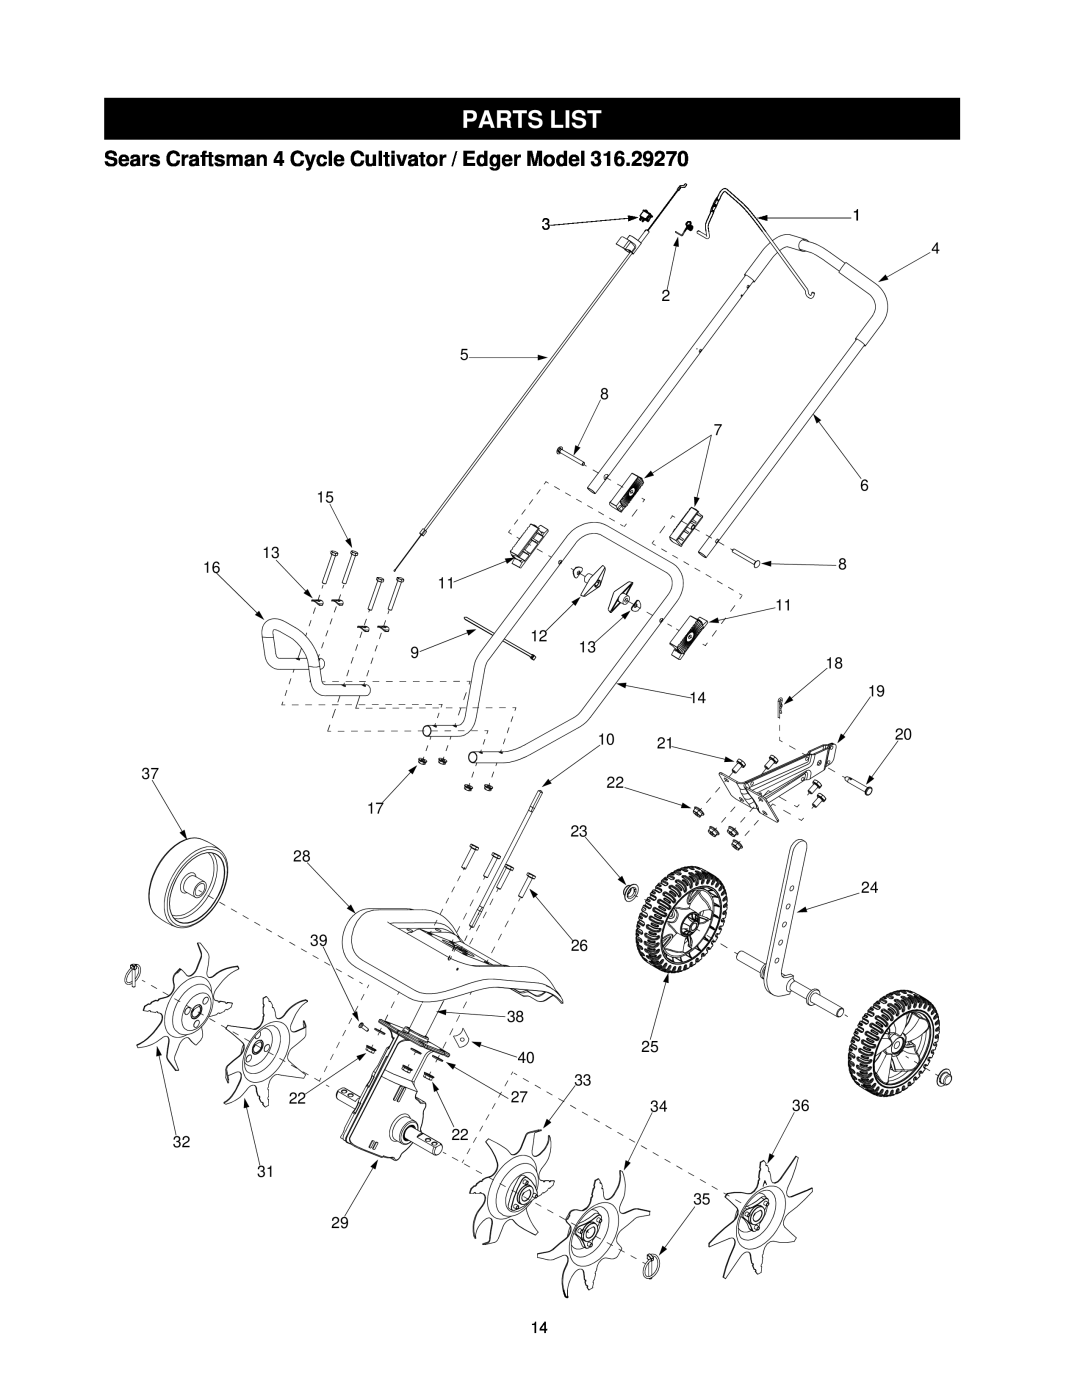 Craftsman 316.2927 manual Parts List, Sears Craftsman 4 Cycle Cultivator / Edger Model 